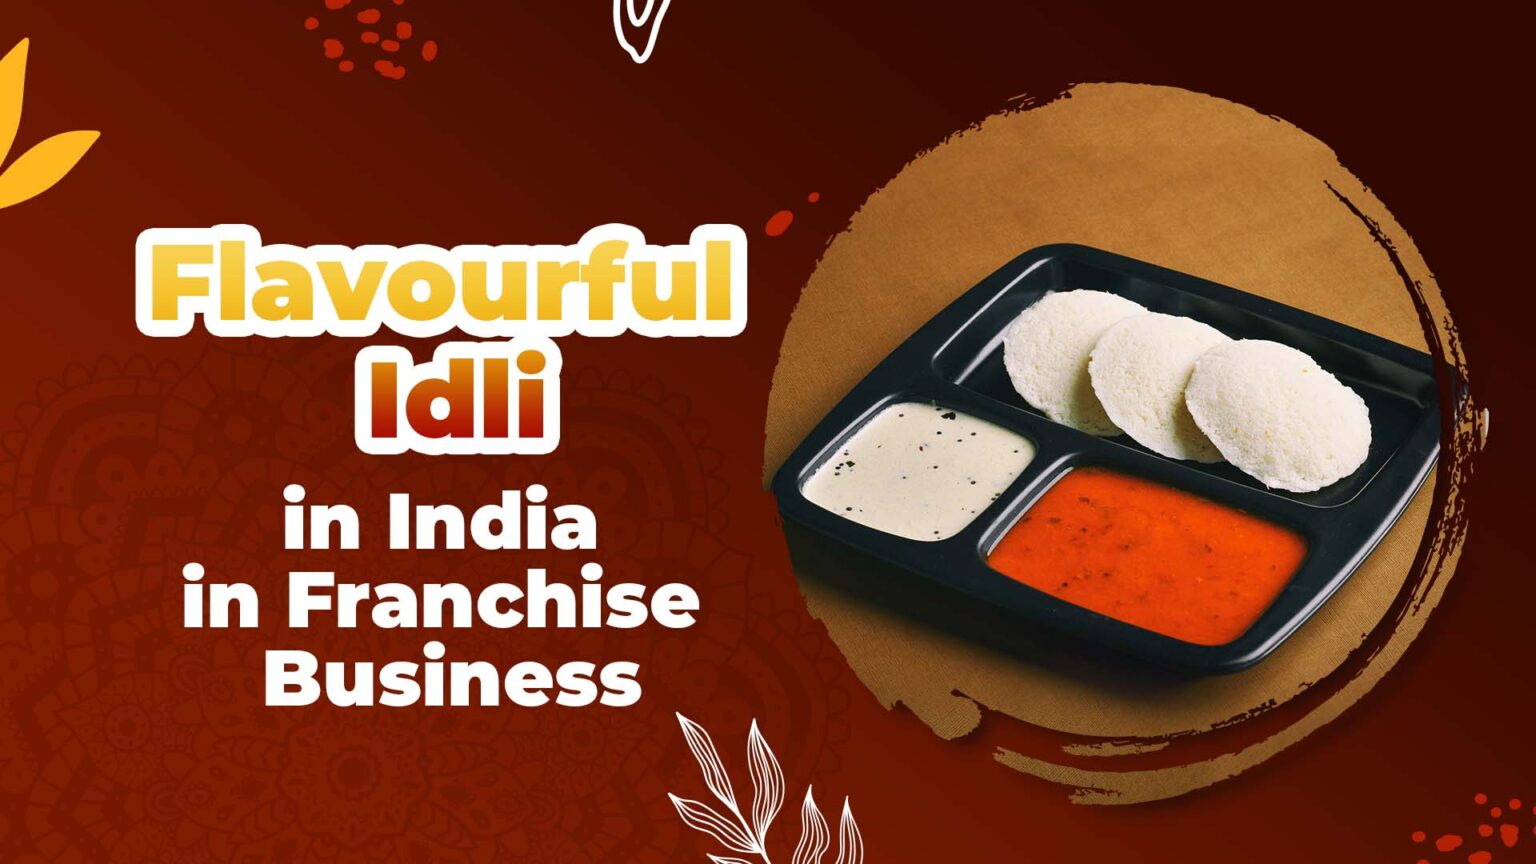 Explore Flavourful Idli in India in Franchise Business